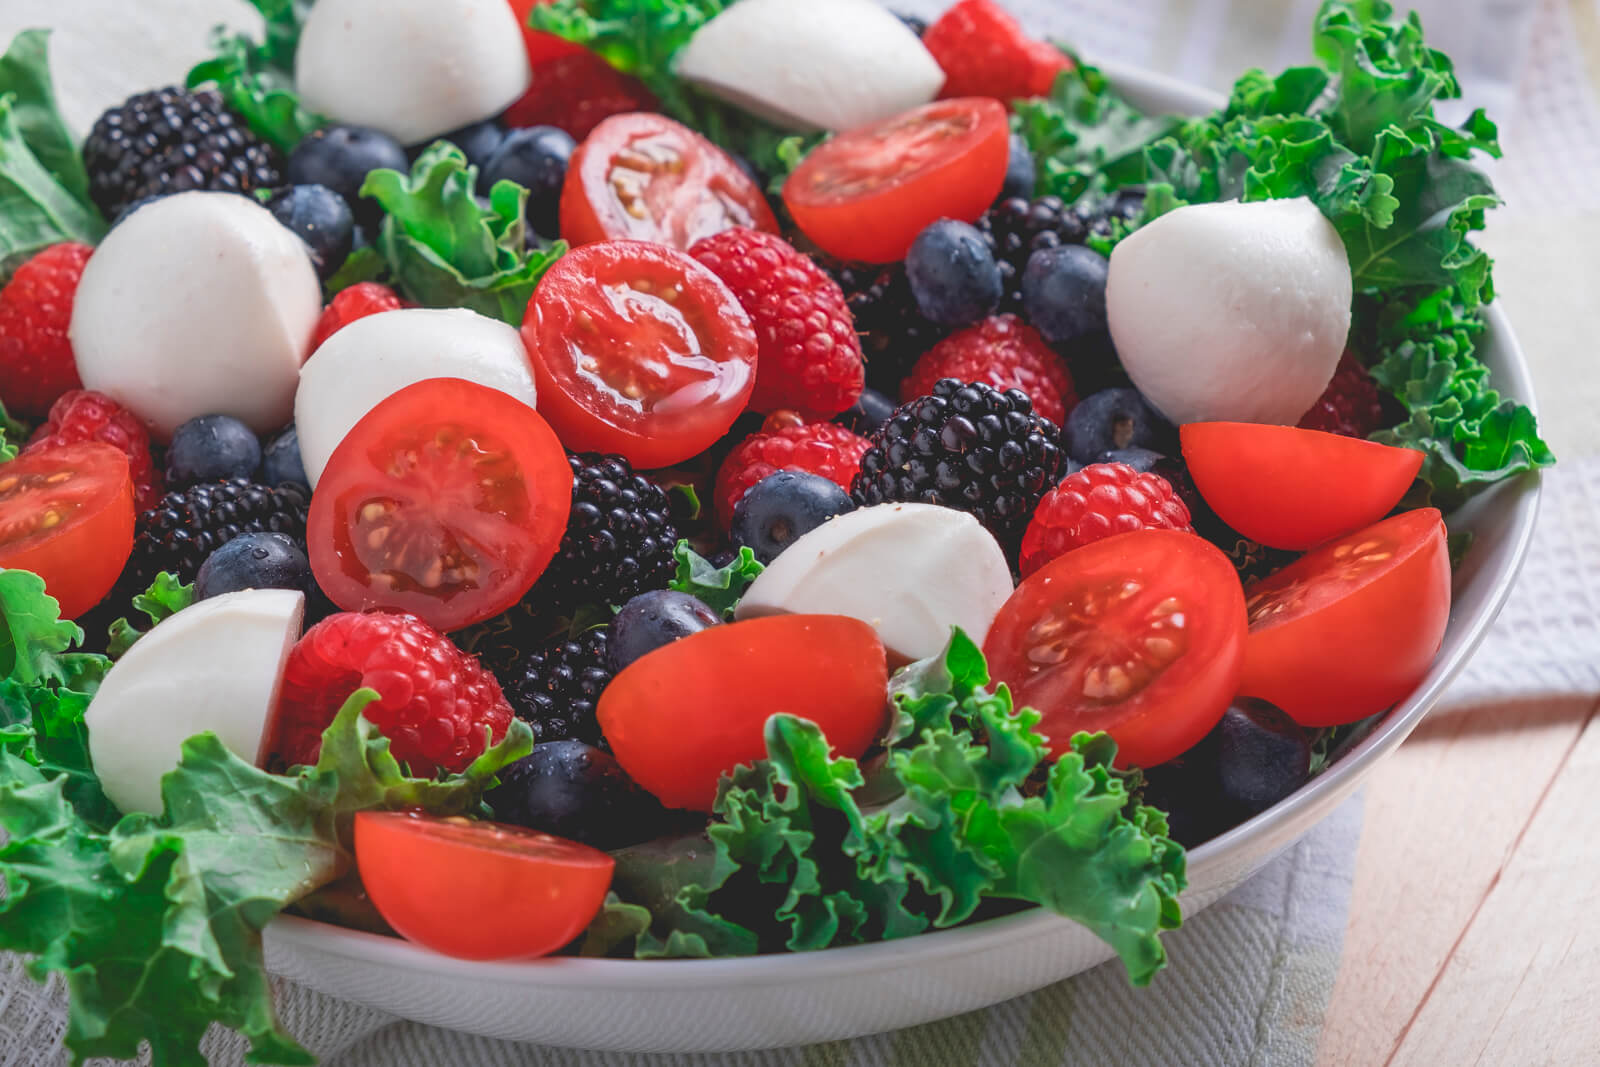 This delicious cherry tomato & berry salad is the taste of summer! Try it once and you'll see why it's become a go-to dish for all occasions!